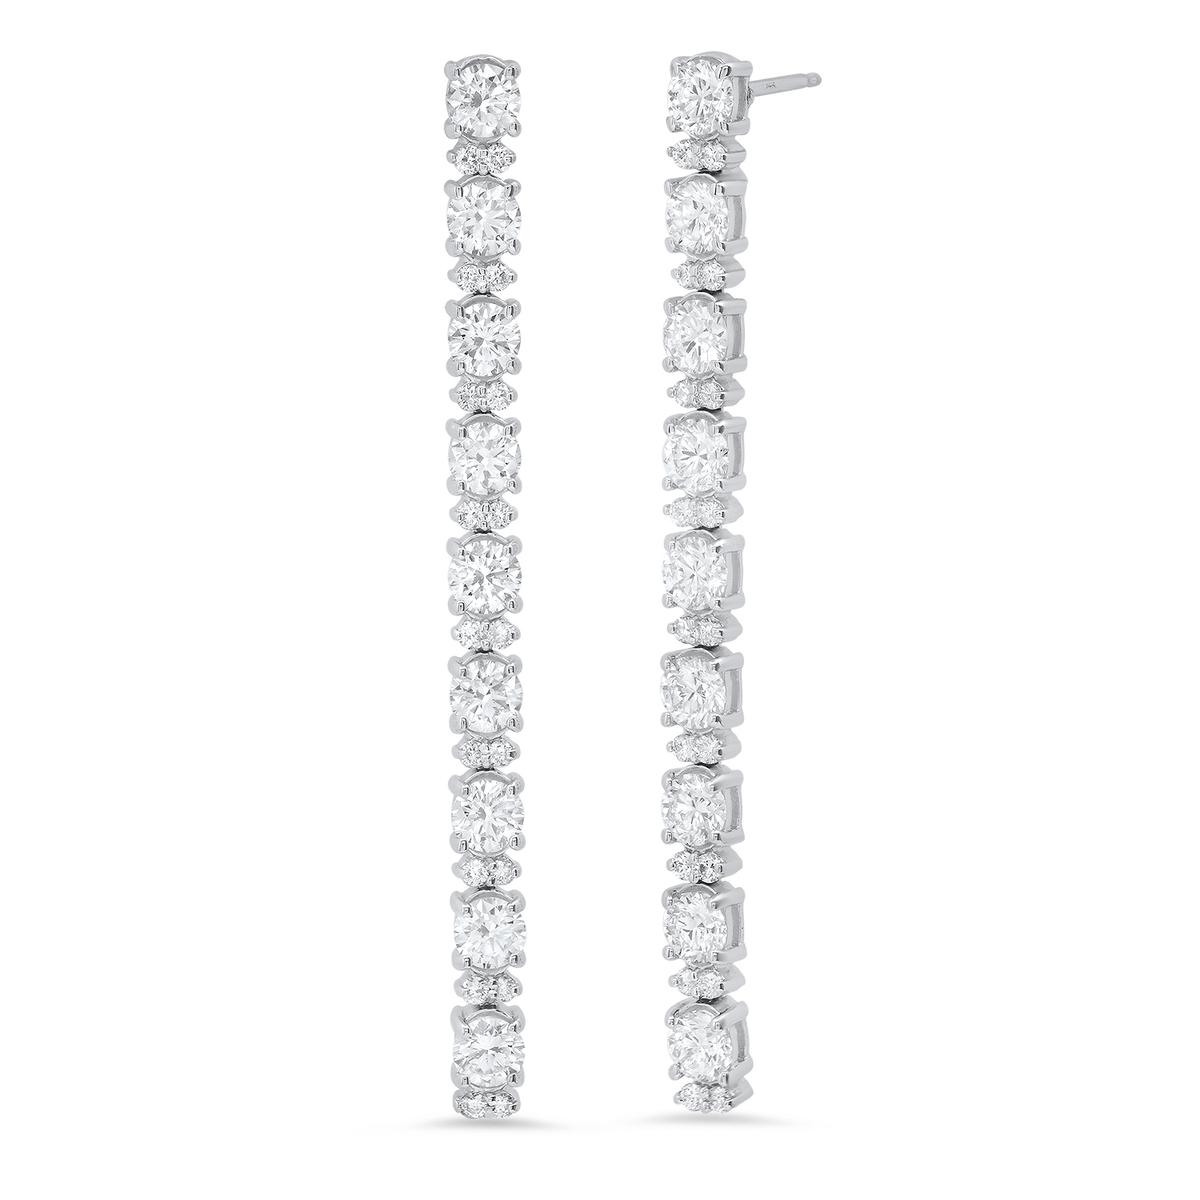 14K White Gold Earring and Necklace Set with 4.58ct Diamonds